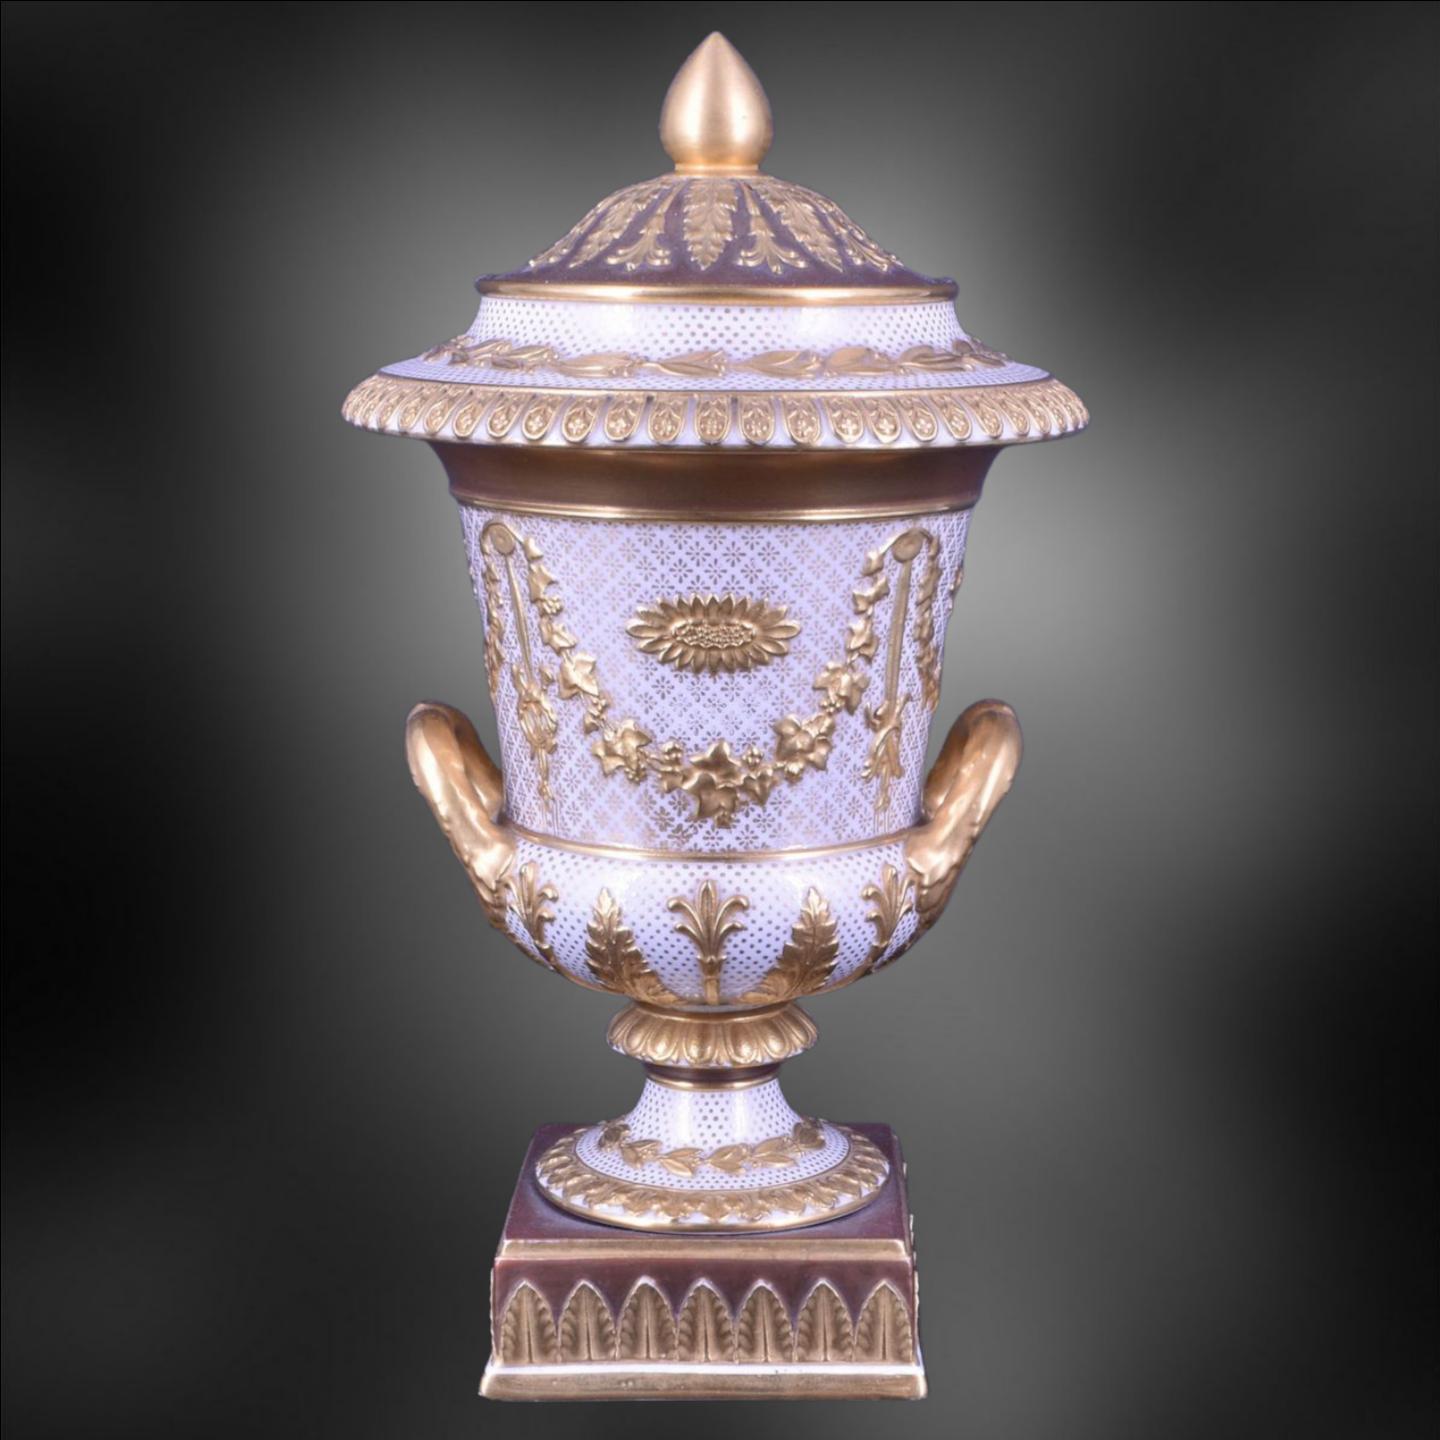 A marvellous combination of Wedgwood's traditional neoclassical style, in the form of a campana vase; which has been decorated in High Victorian style with gilt and bronzing.

